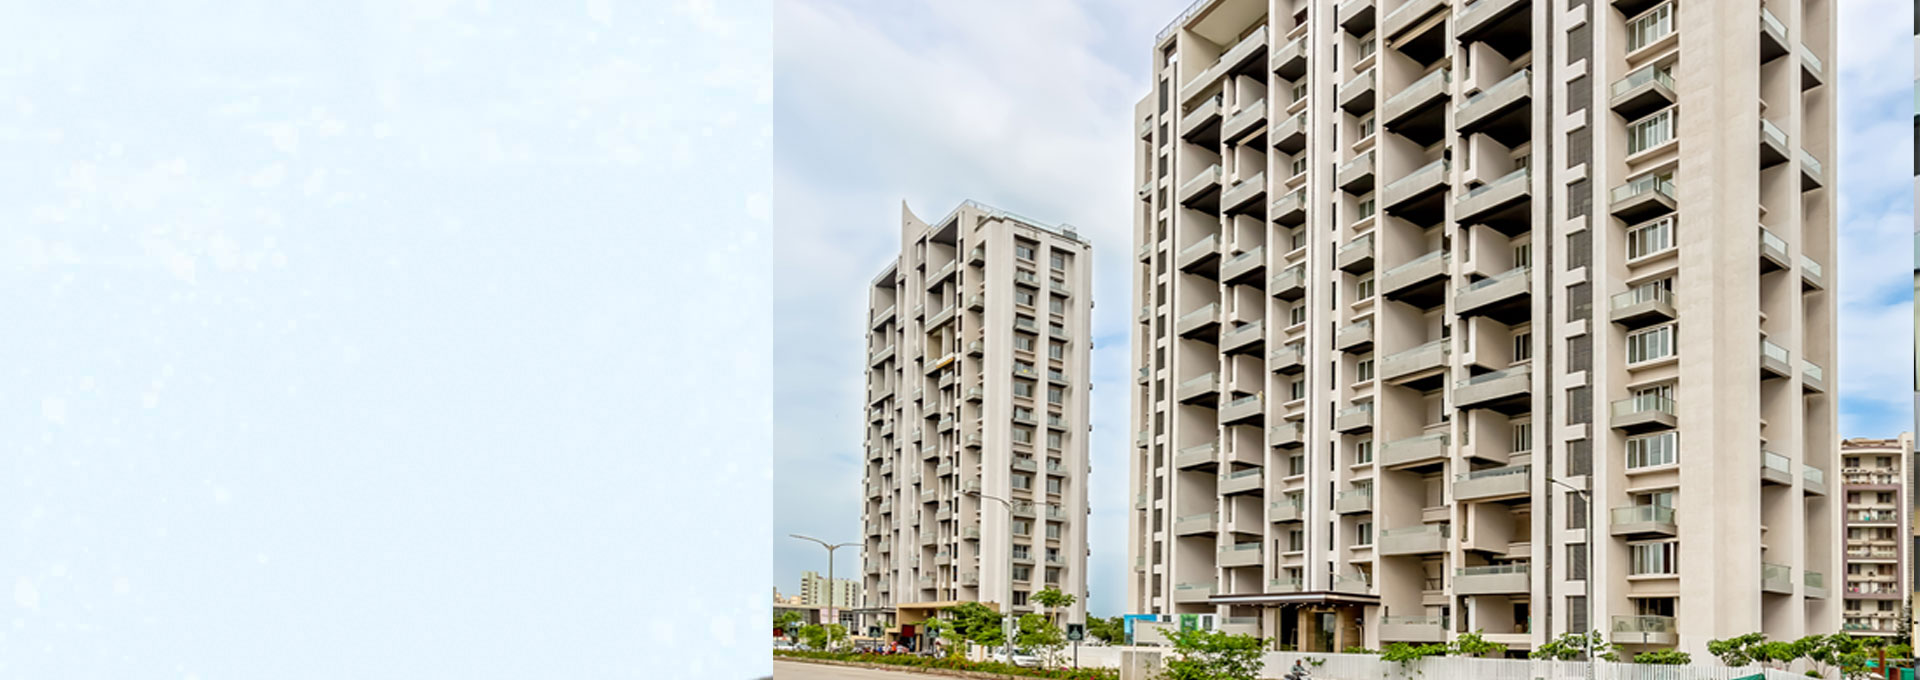 The Spires 4 and 5 BHK  flats in  Aundh, Pune